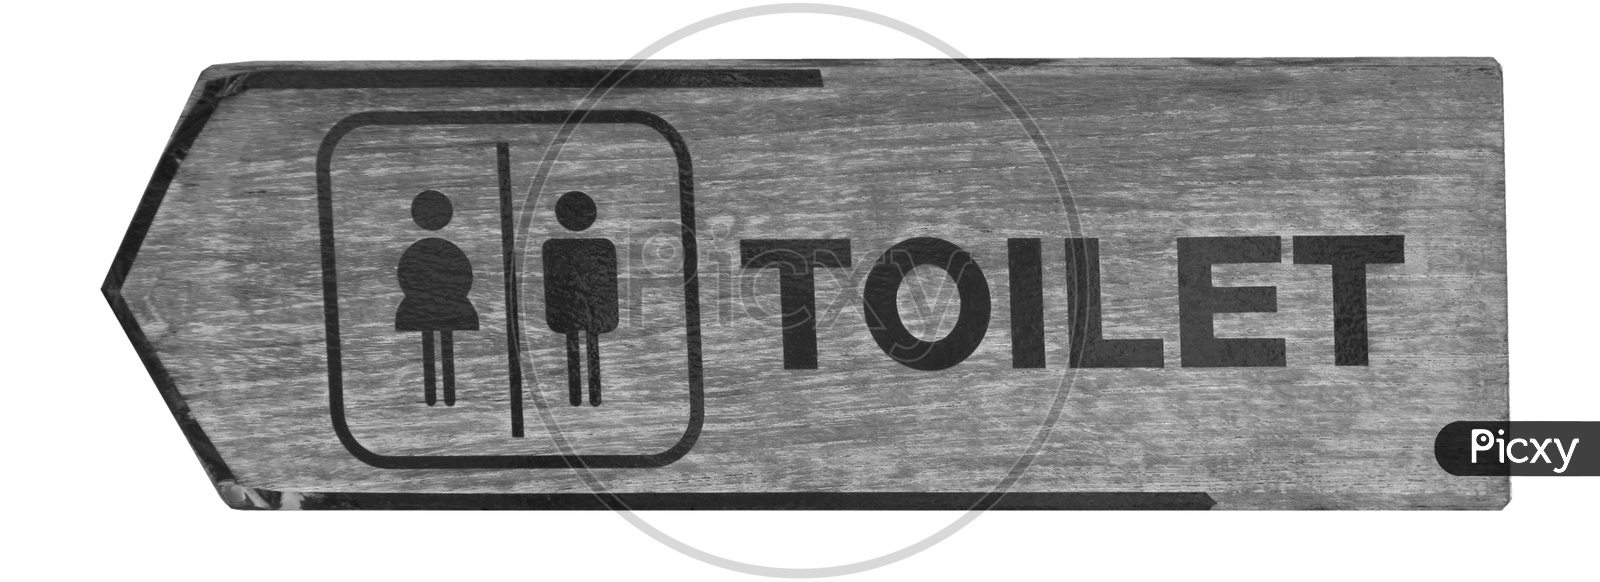 A Toilet signage on the wall